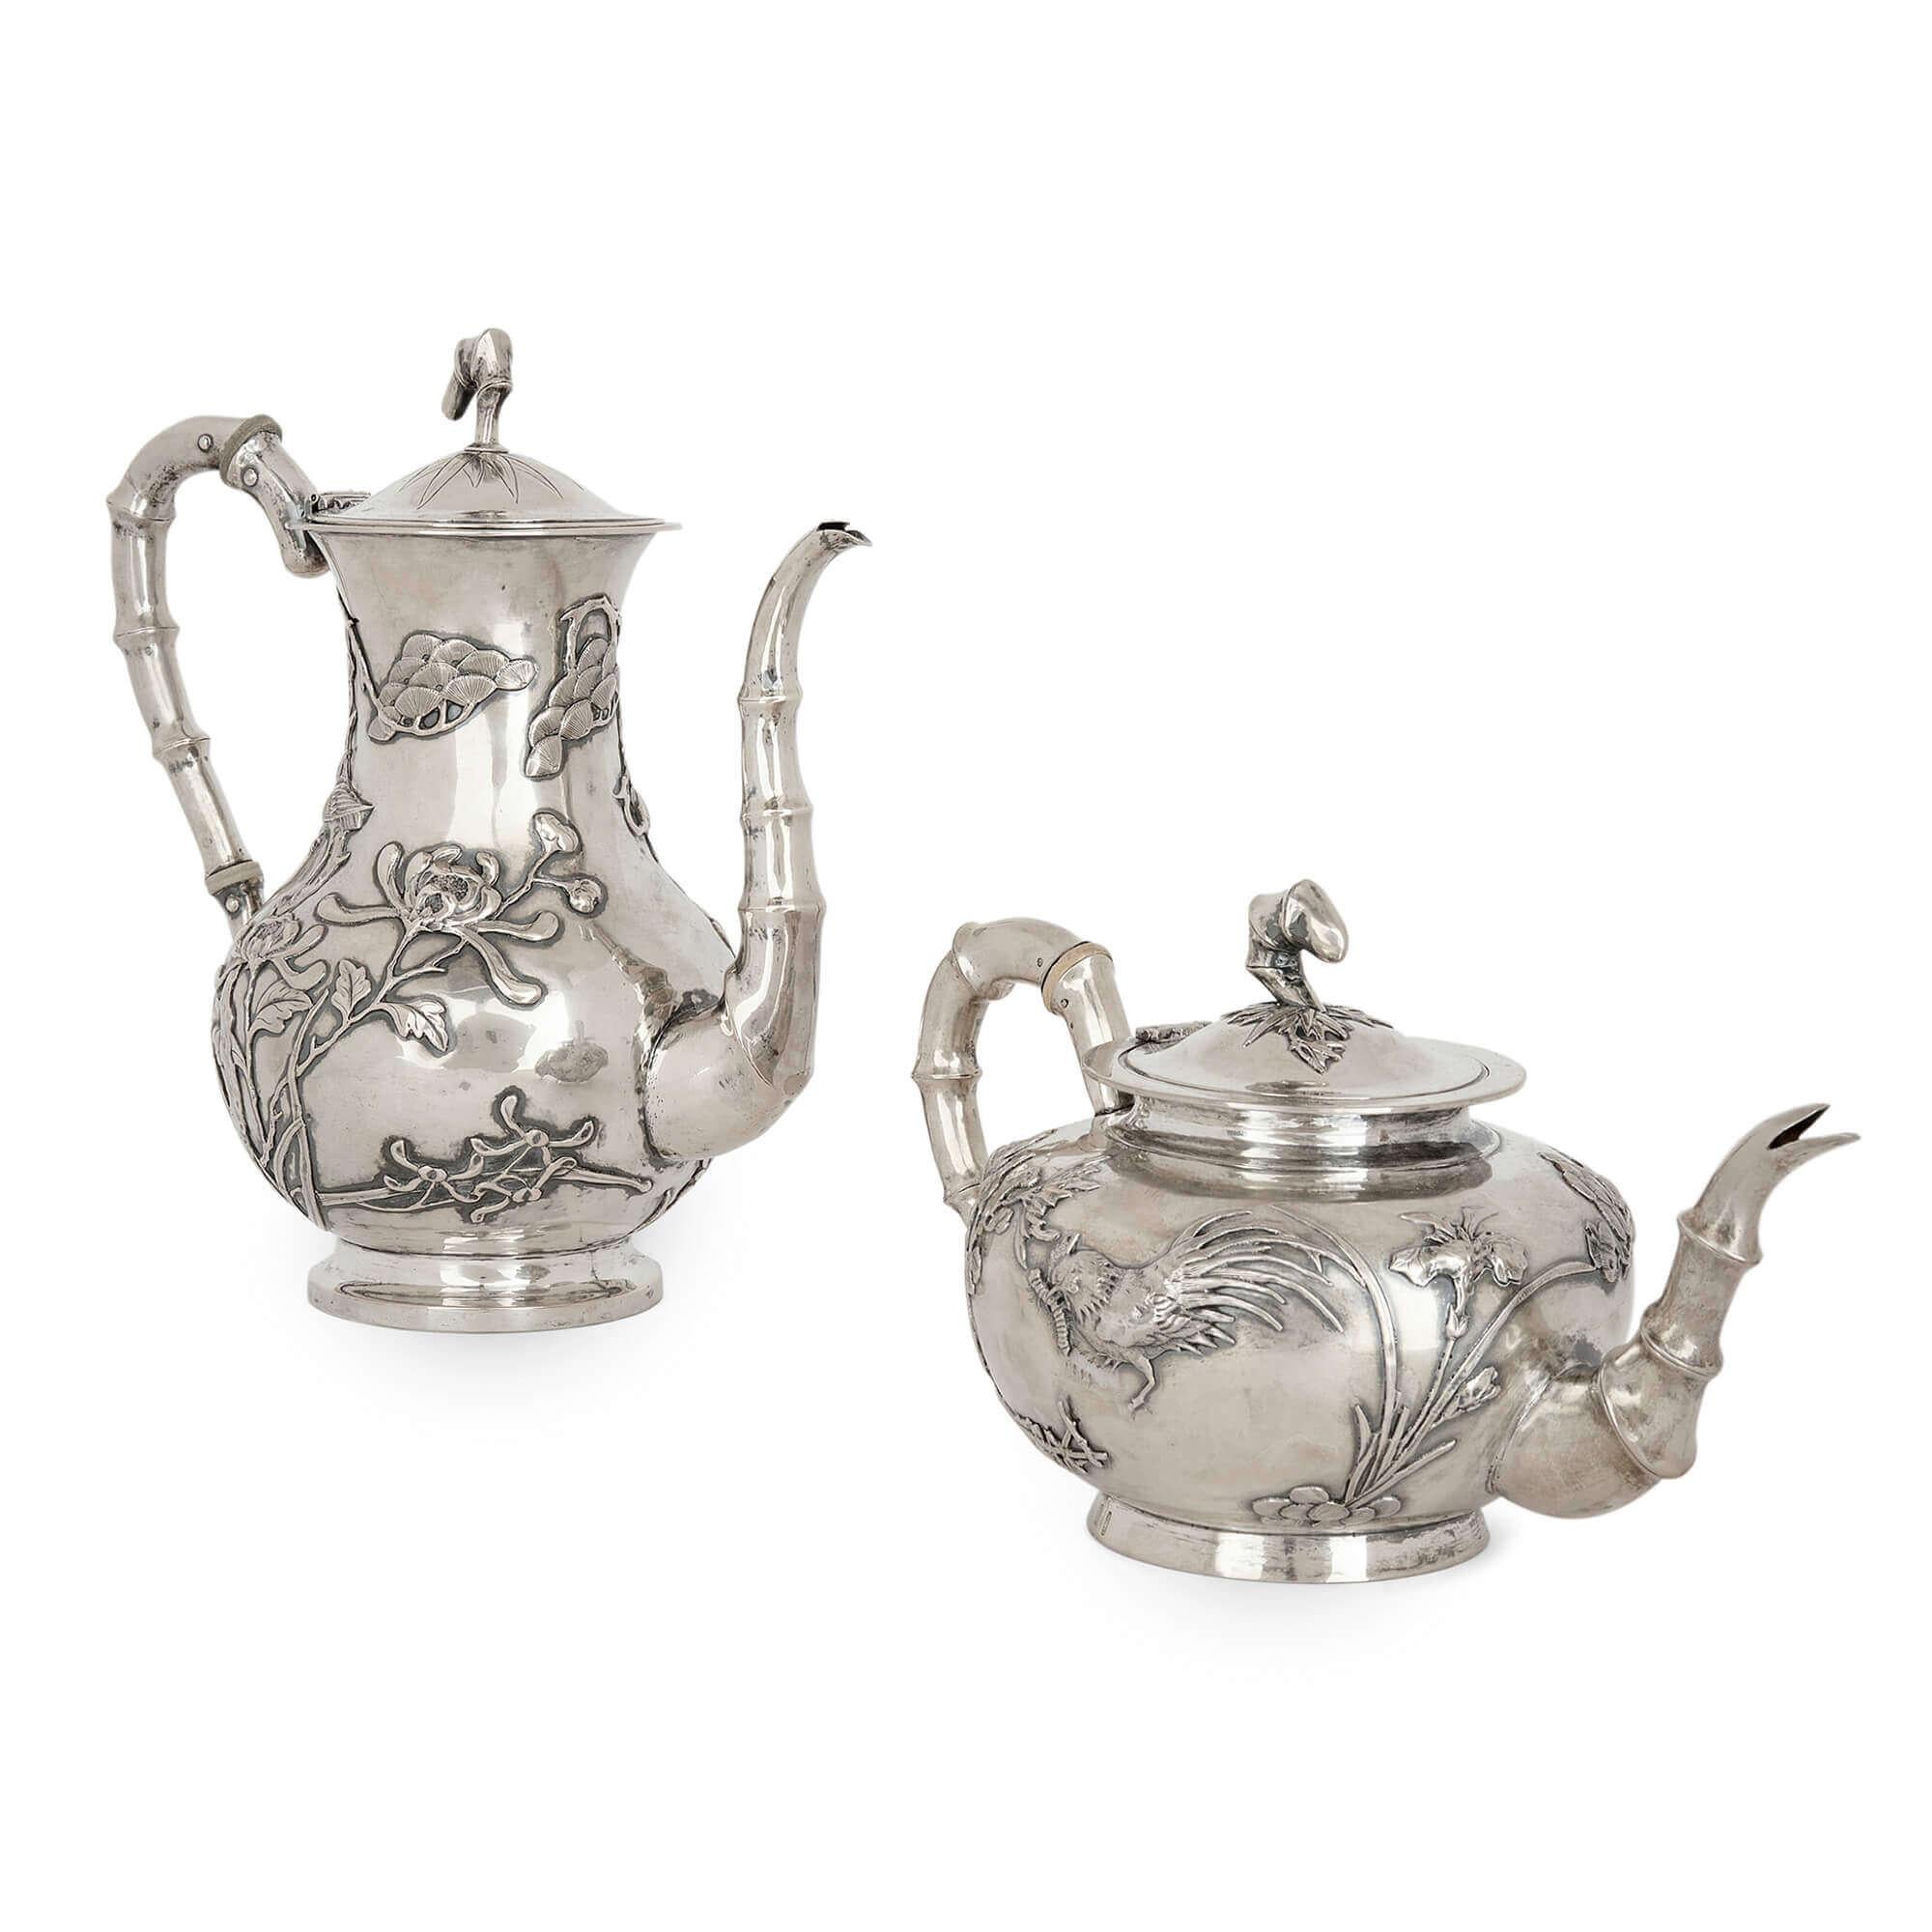 Silver Chinese Export tea and coffee service, by Tuck Chang & Co., Shanghai
Chinese, Late 19th century
Measures: Milk jug: height 8cm, width 14cm, depth 10cm
Coffee pot: height 25cm, width 24cm, depth 14cm
Total weight: 3,446 grams.

Bearing